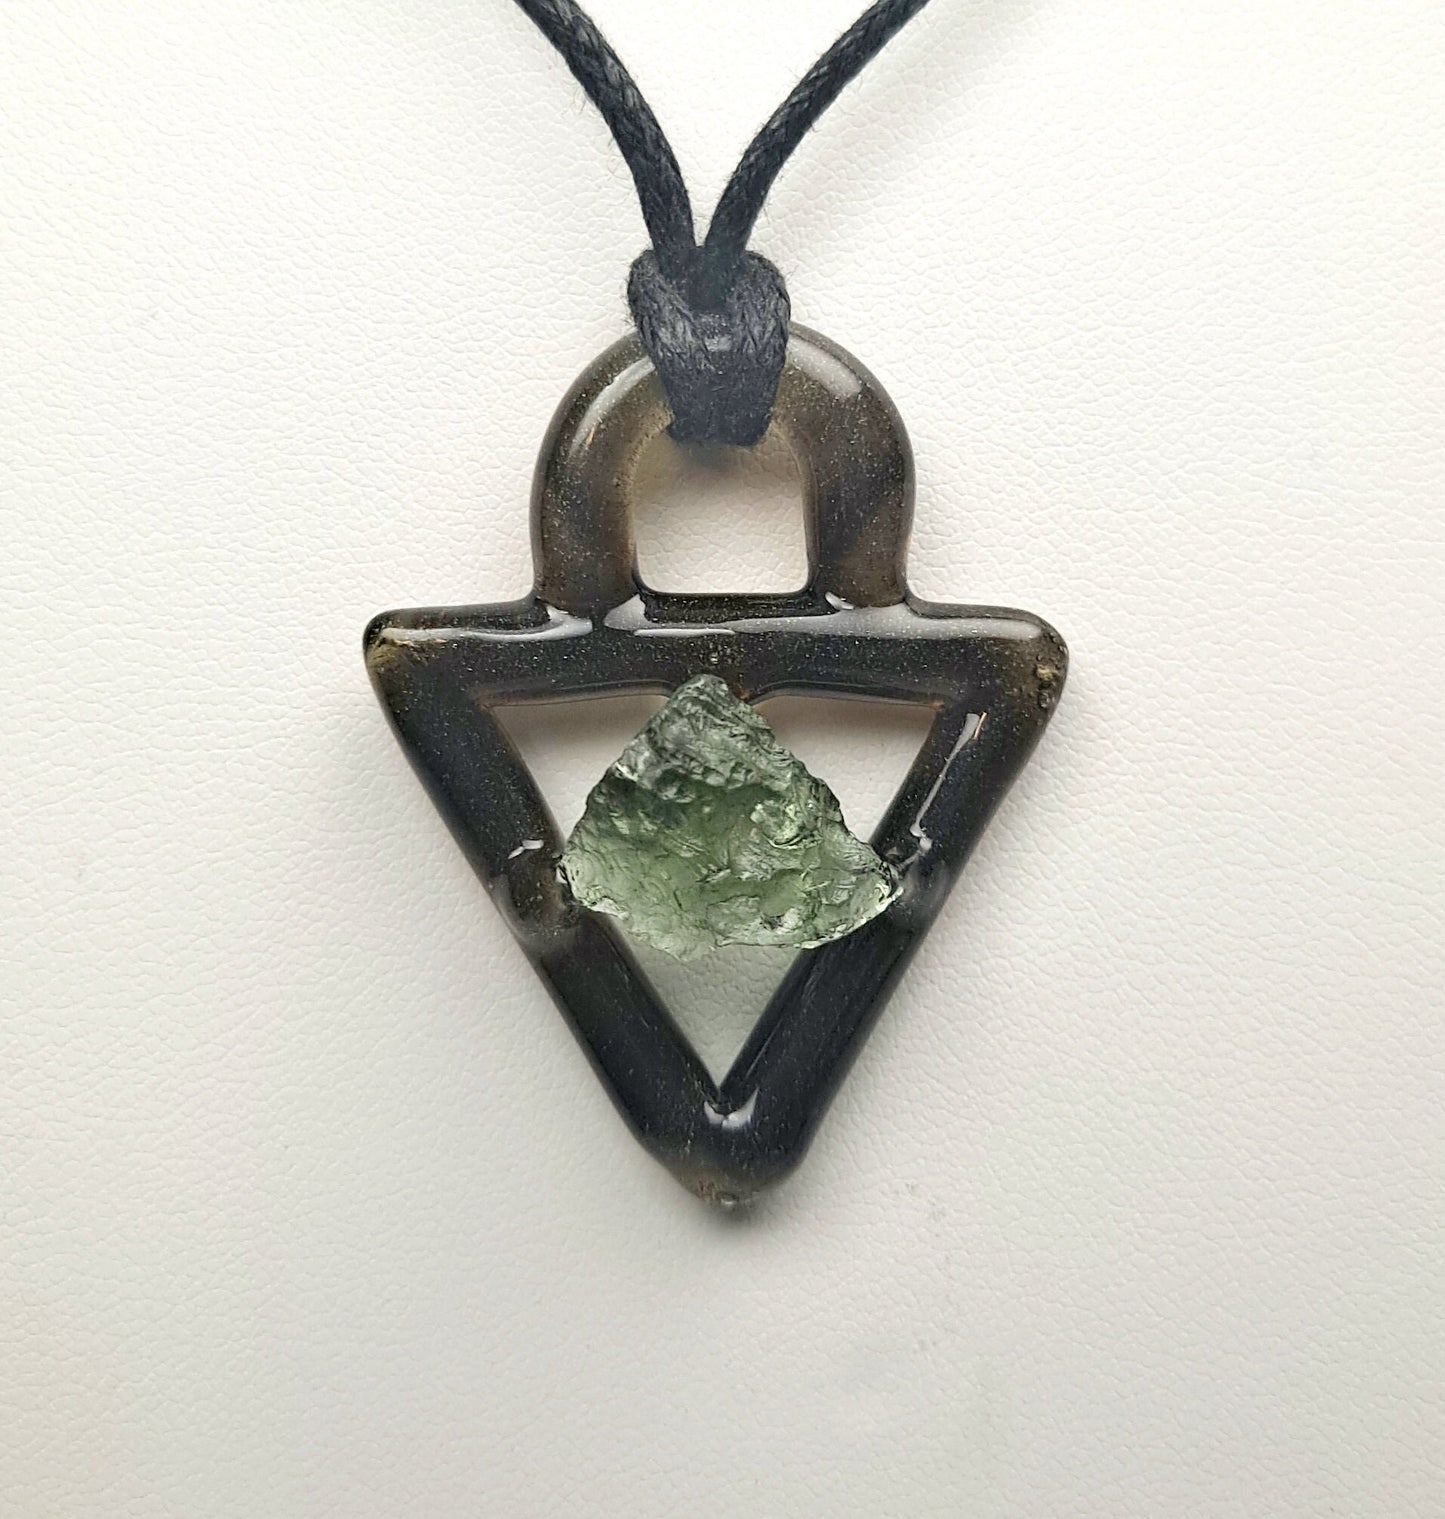 Limited Edition Moldavite and Glass Necklace Collection